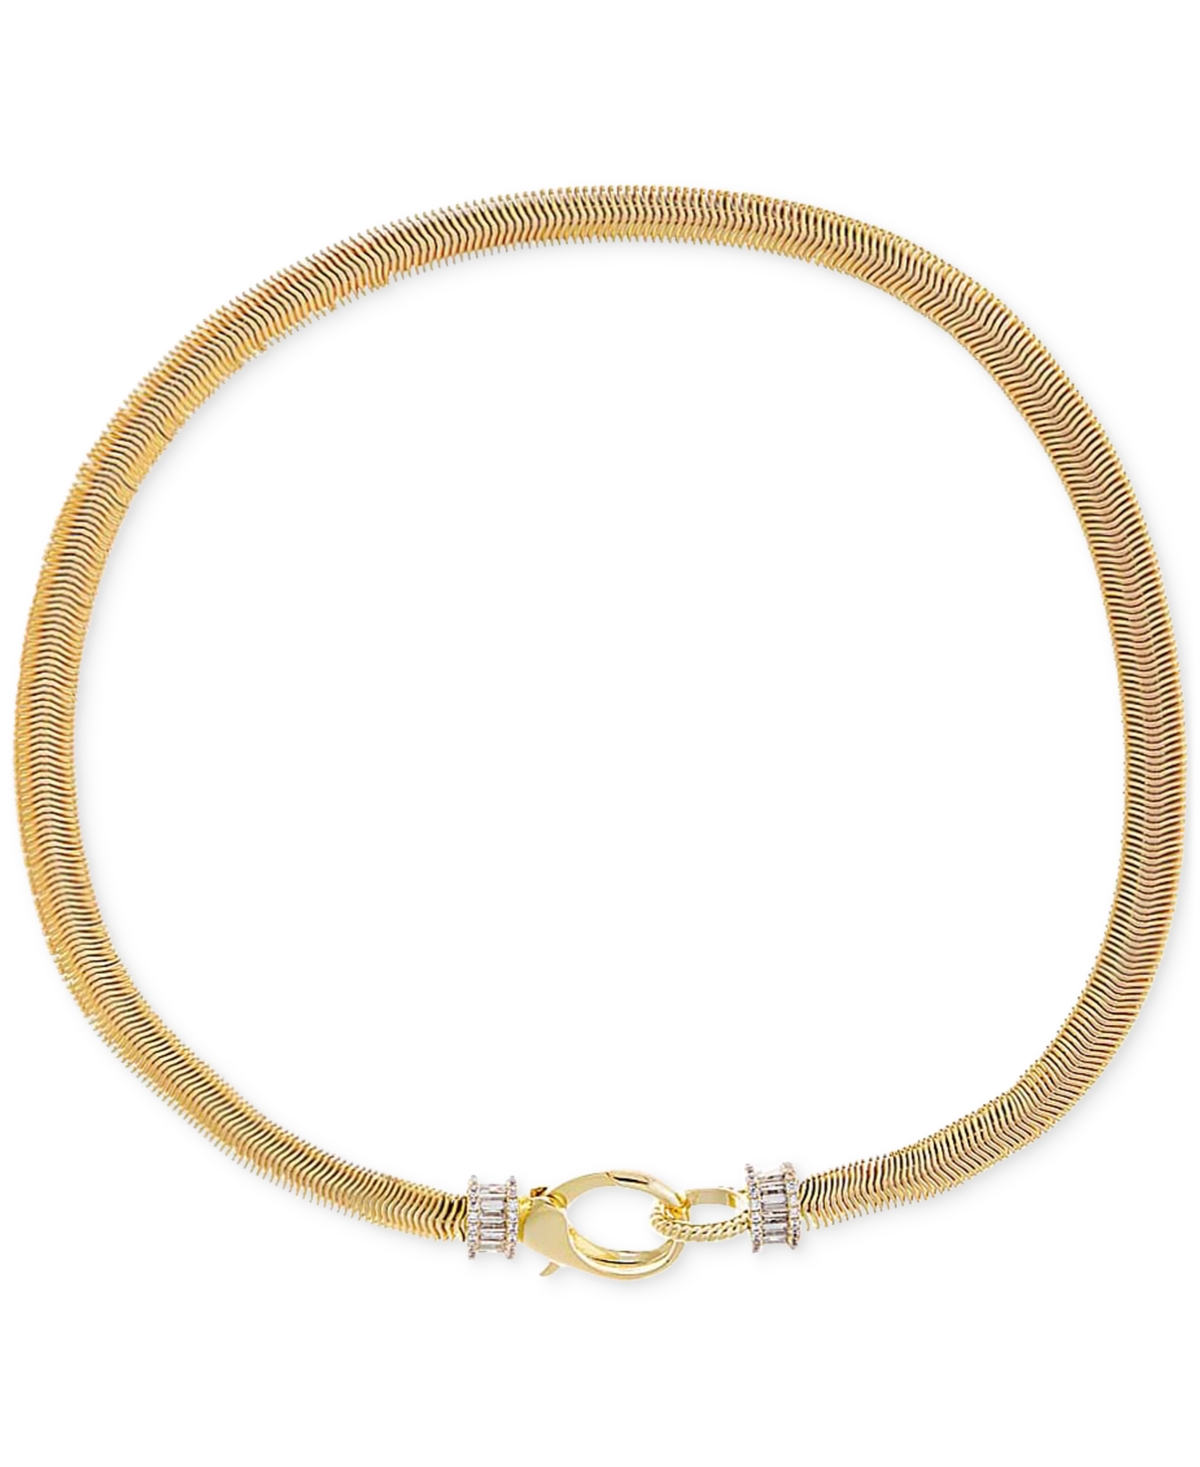 By Adina Eden 14k Gold-plated Baguette Cubic Zirconia Bead Snake Chain 16" Collar Necklace